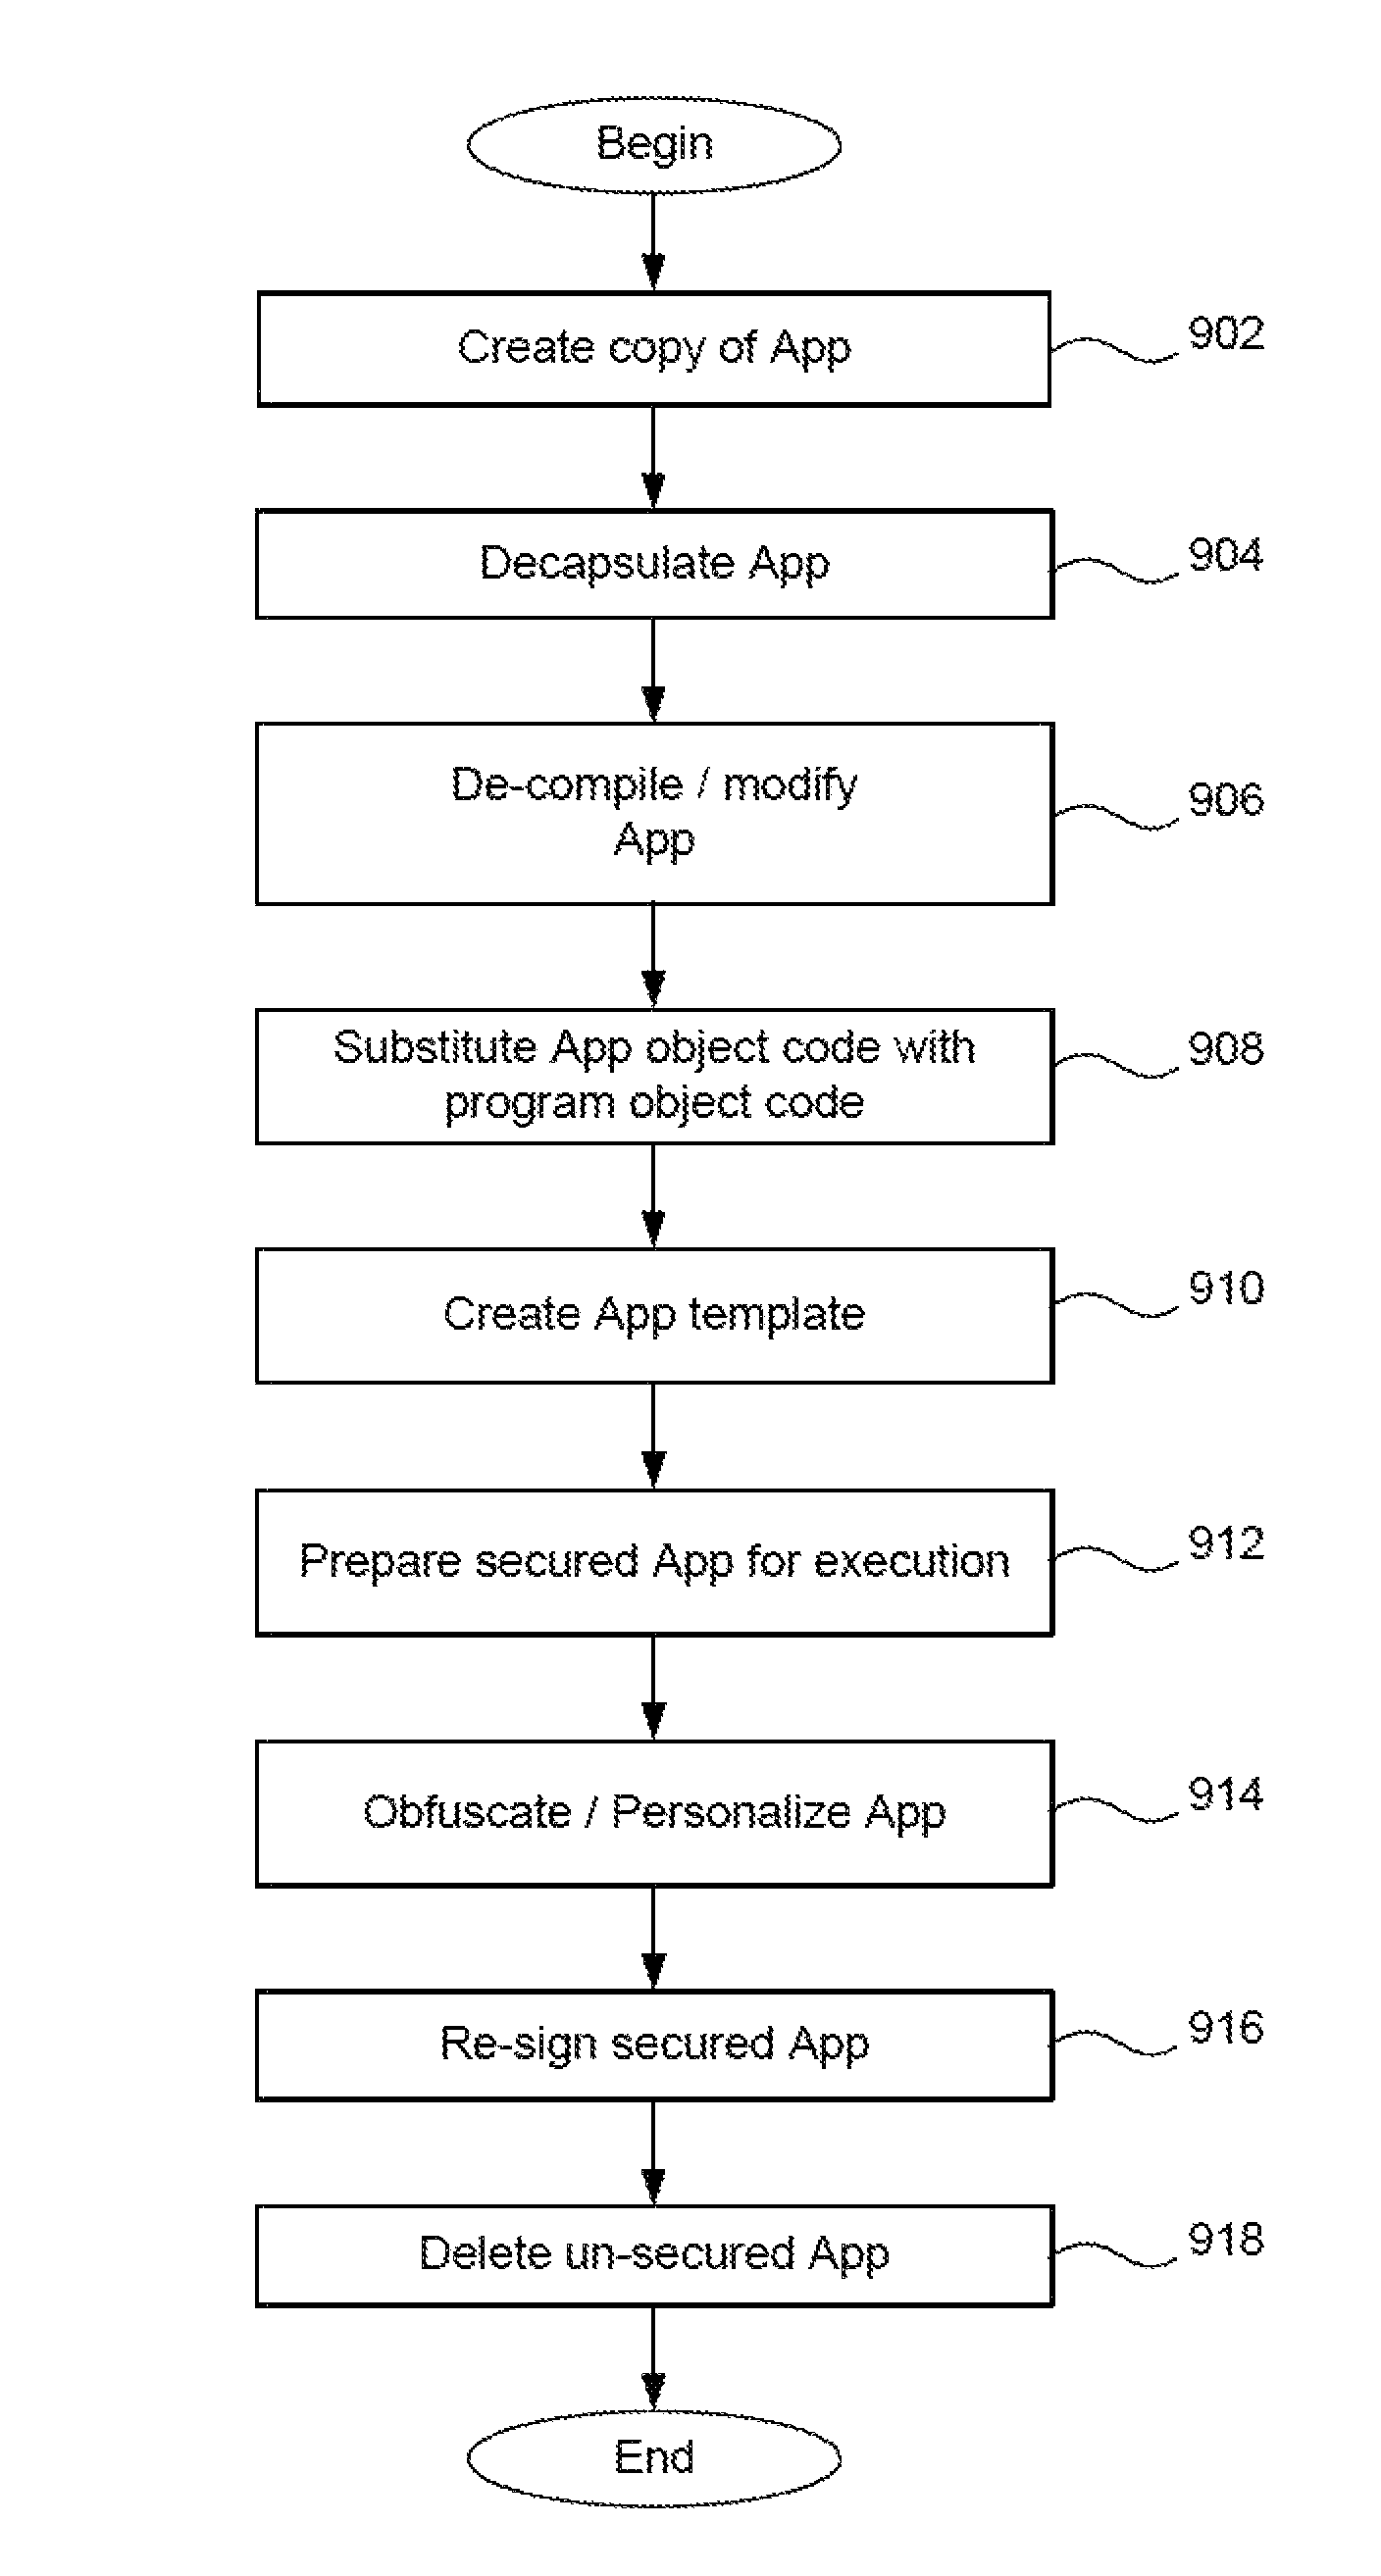 Secure execution of unsecured apps on a device